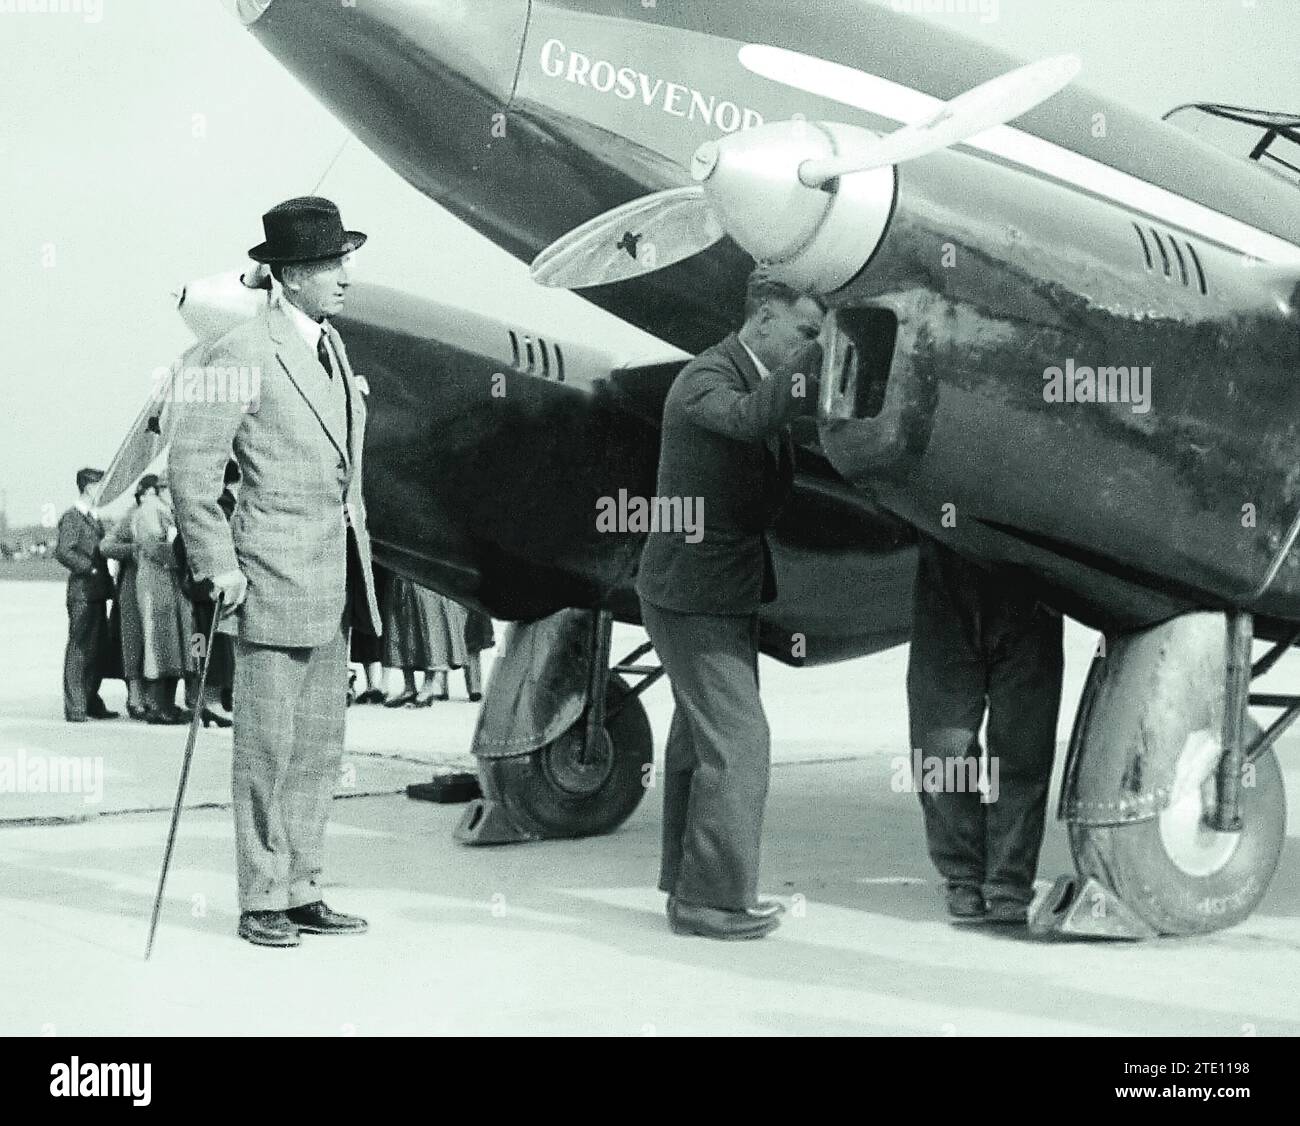 10/18/1934. Lord Londonderry visits Mildenhall airfield - inspecting the aircraft for the London-Melbourne flight. Credit: Album / Archivo ABC Stock Photo